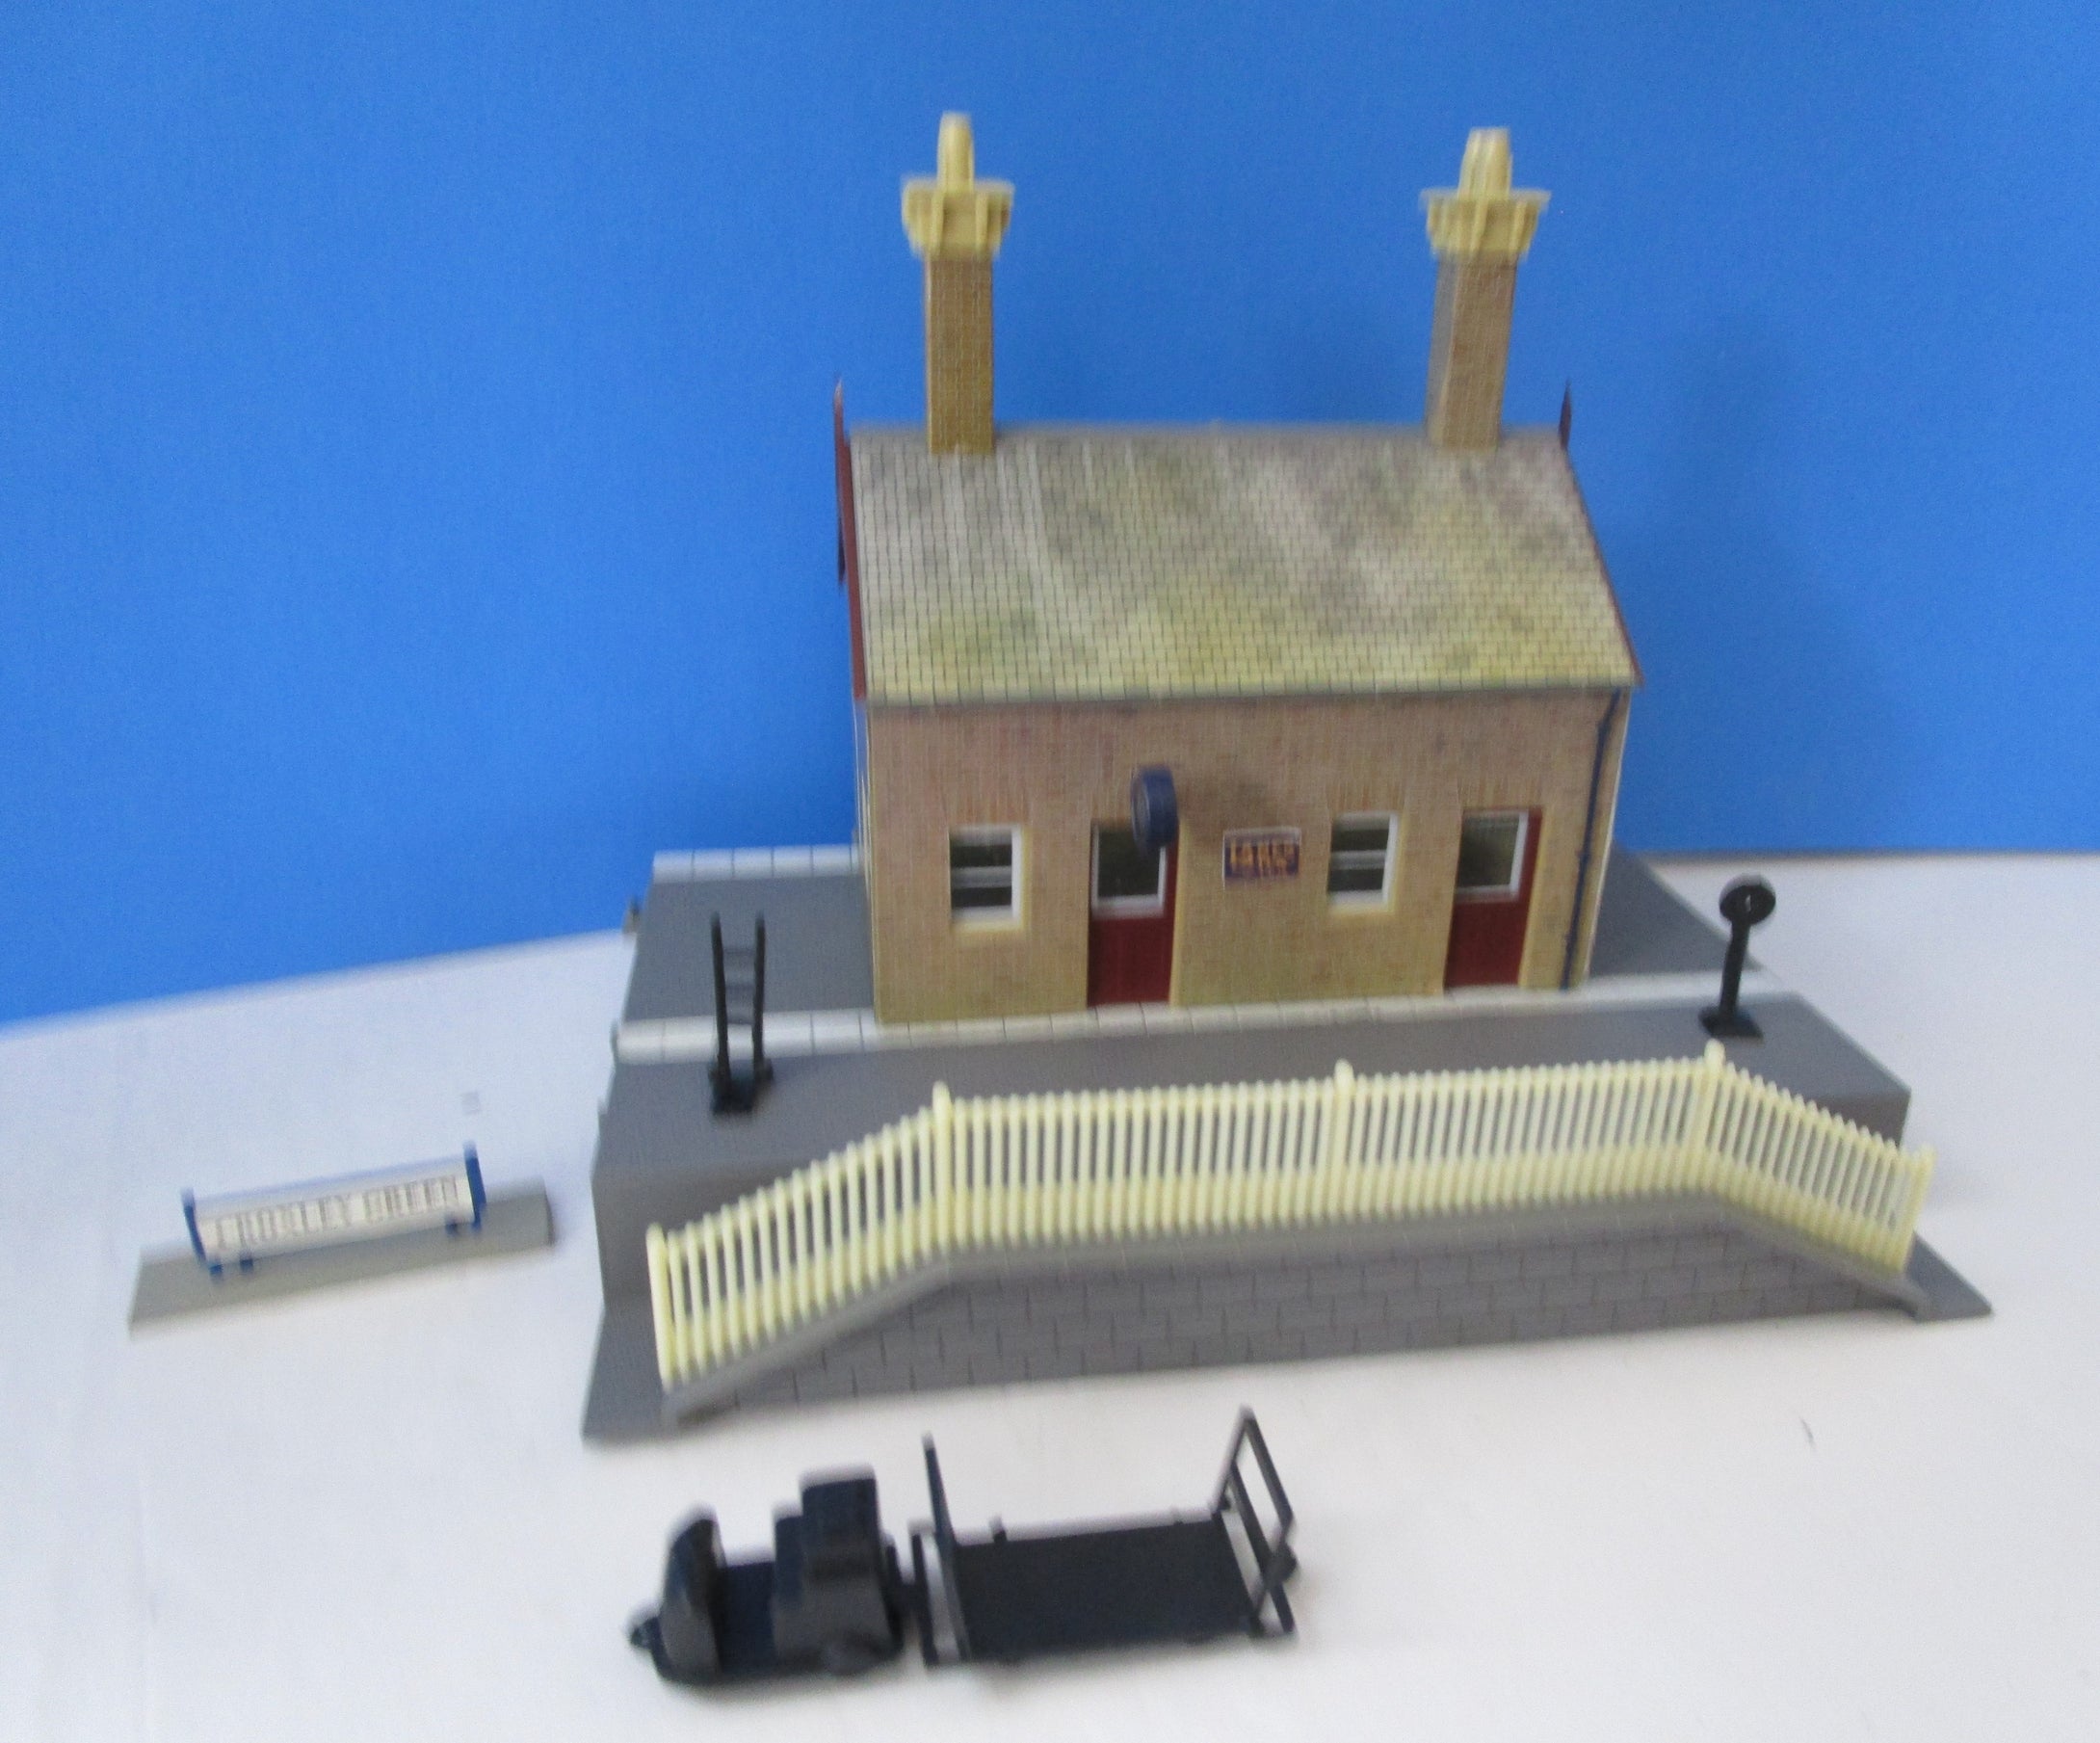 R8001U HORNBY Waiting Room with accessories (used) - BOXED